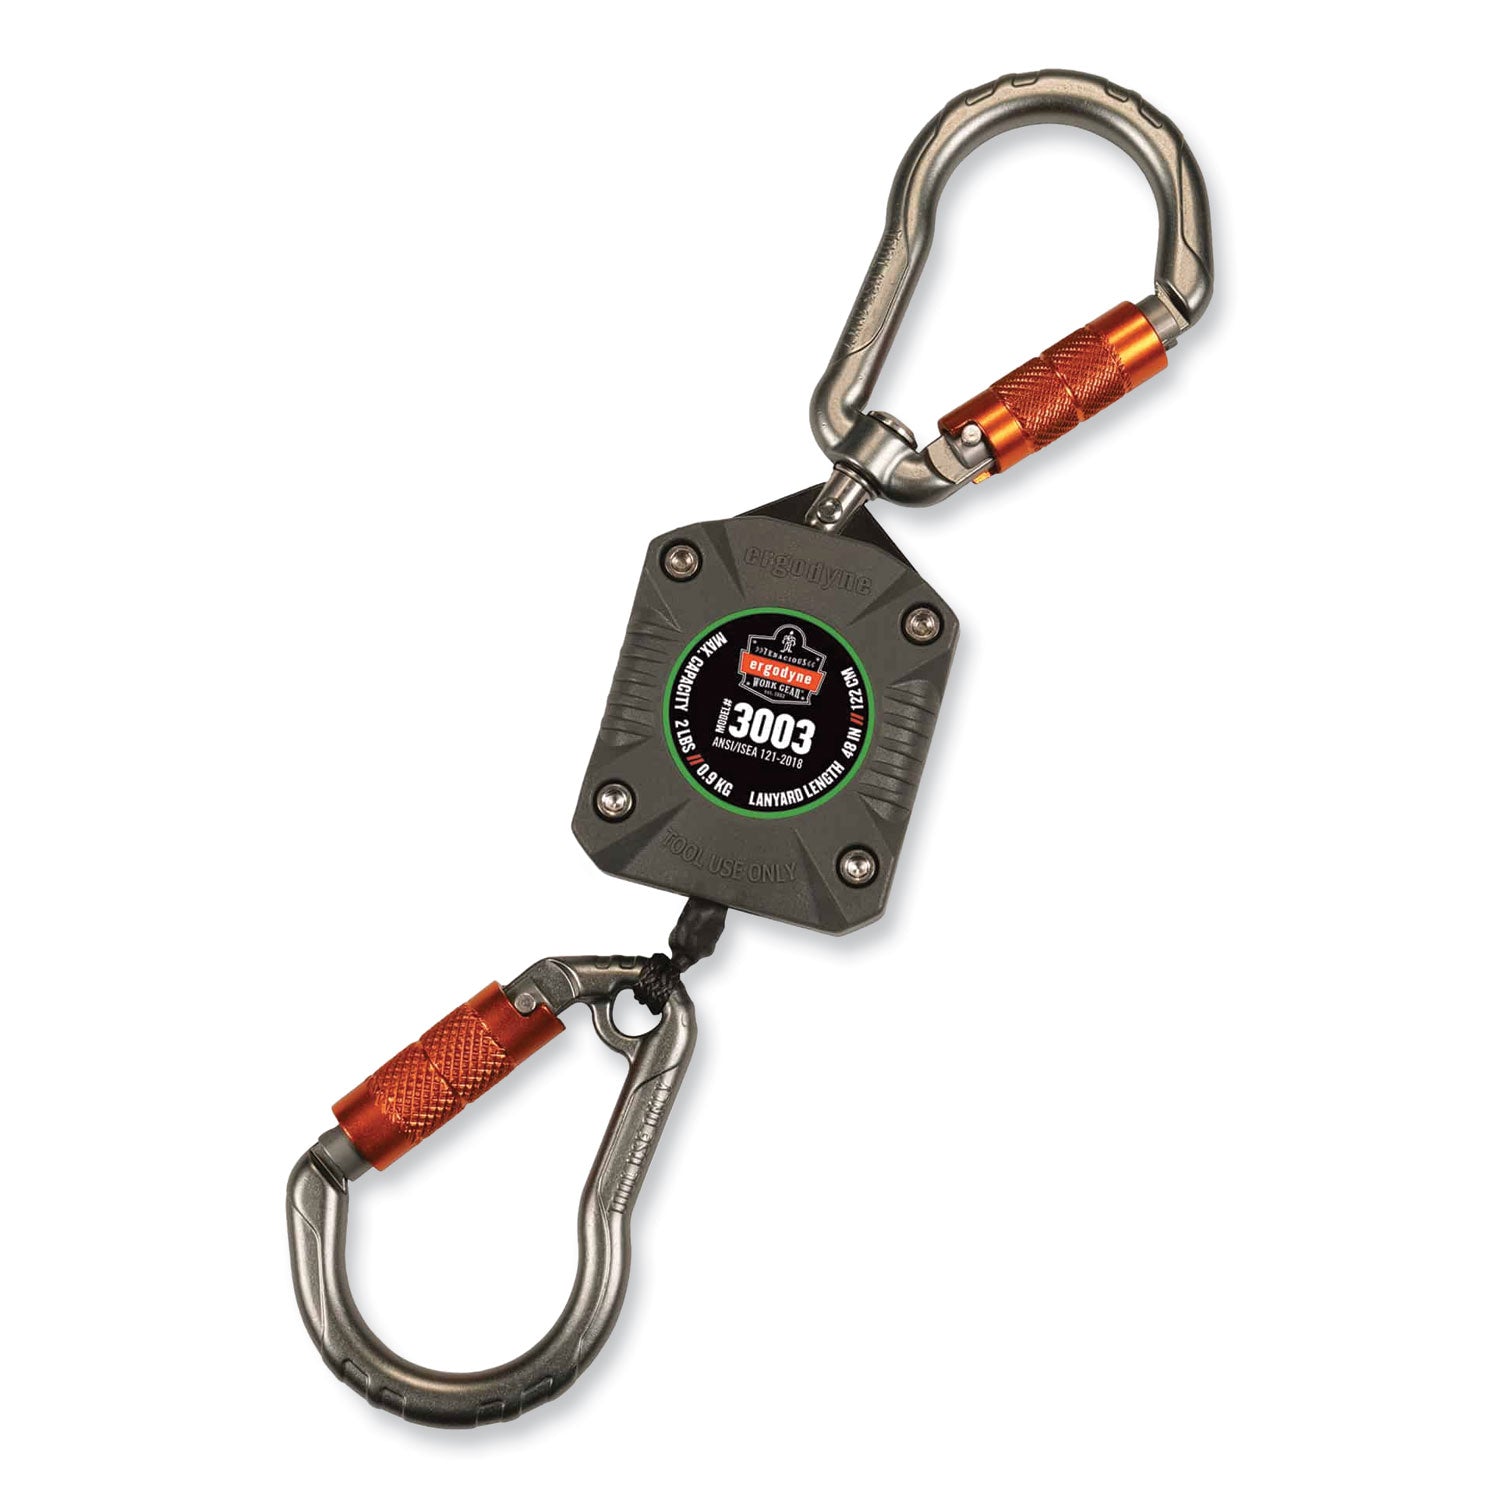 squids-3003-retractable-lanyard-with-two-carabiners-2-lb-max-working-capacity-8-to-48-gray-ships-in-1-3-business-days_ego19303 - 1